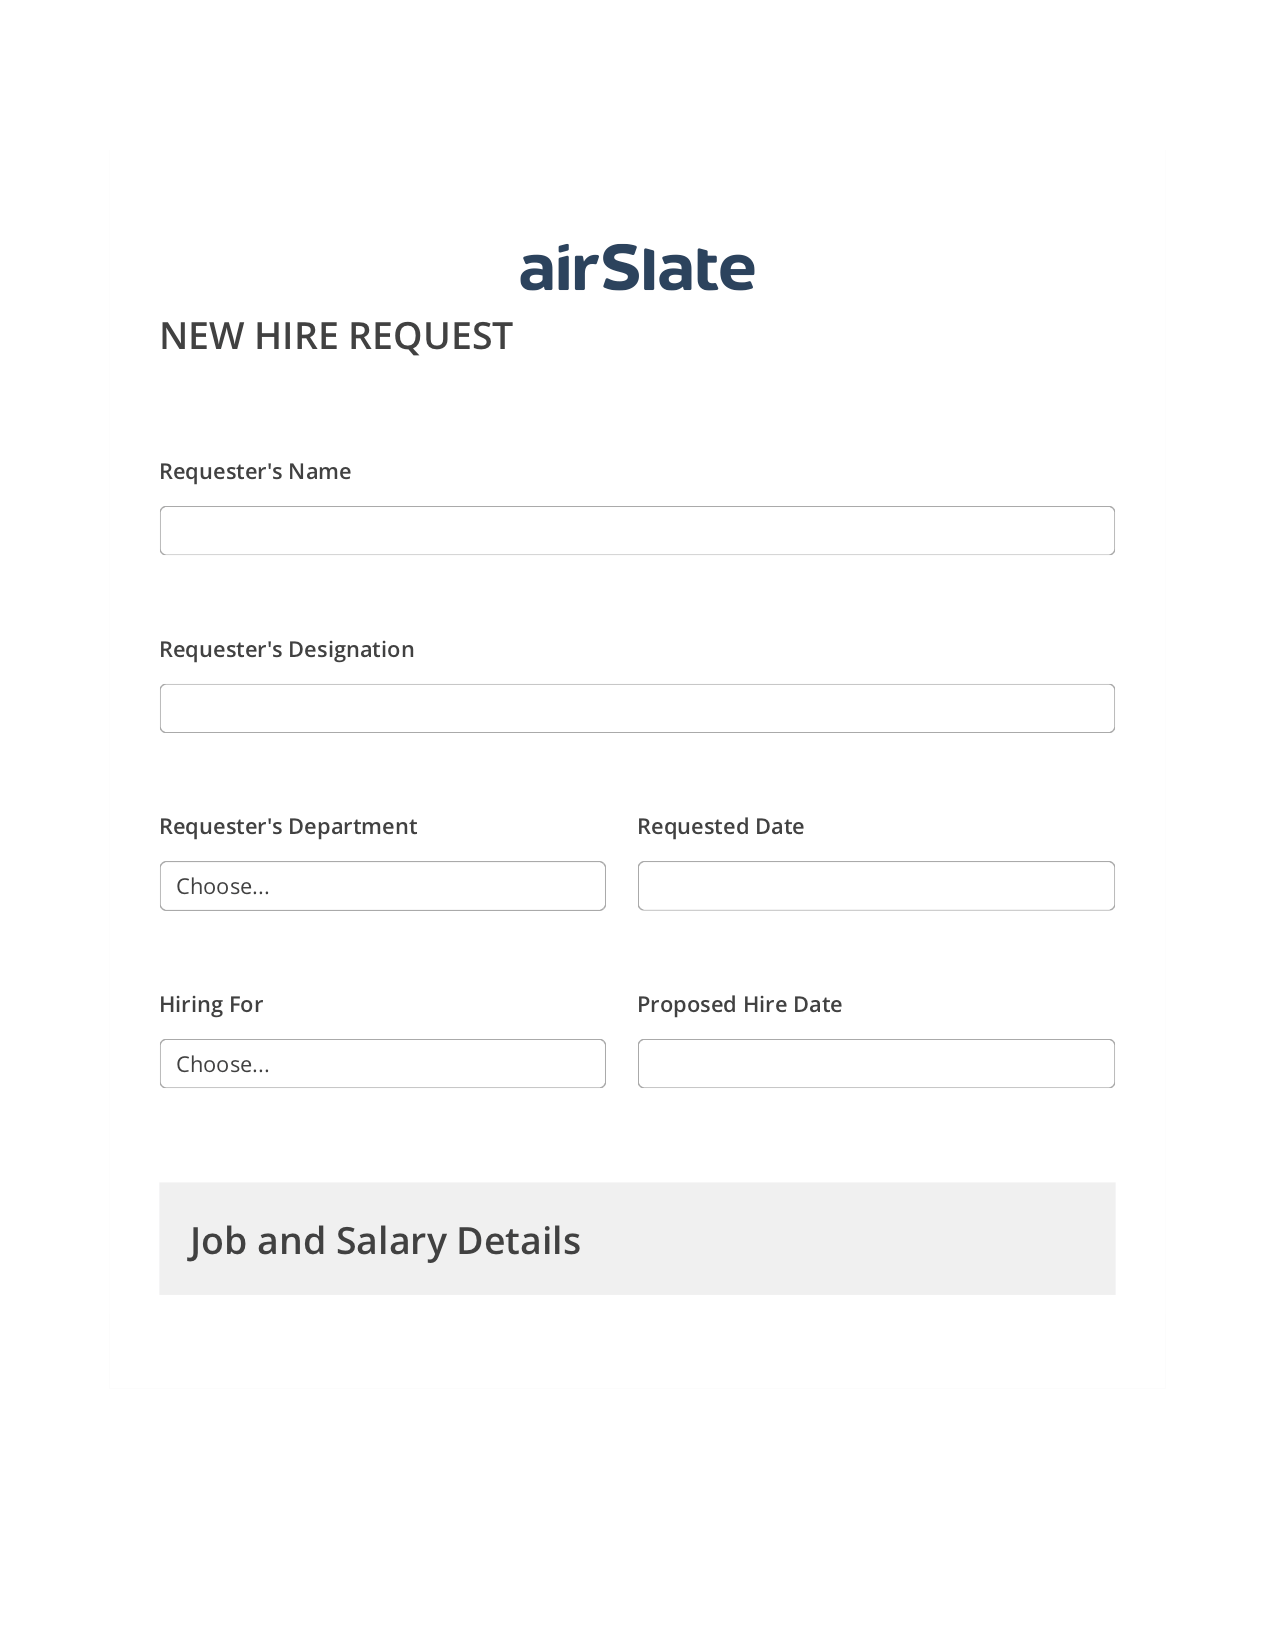 Hiring Request Workflow Pre-fill from Google Sheets Bot, Create slate from another Flow Bot, Export to Excel 365 Bot